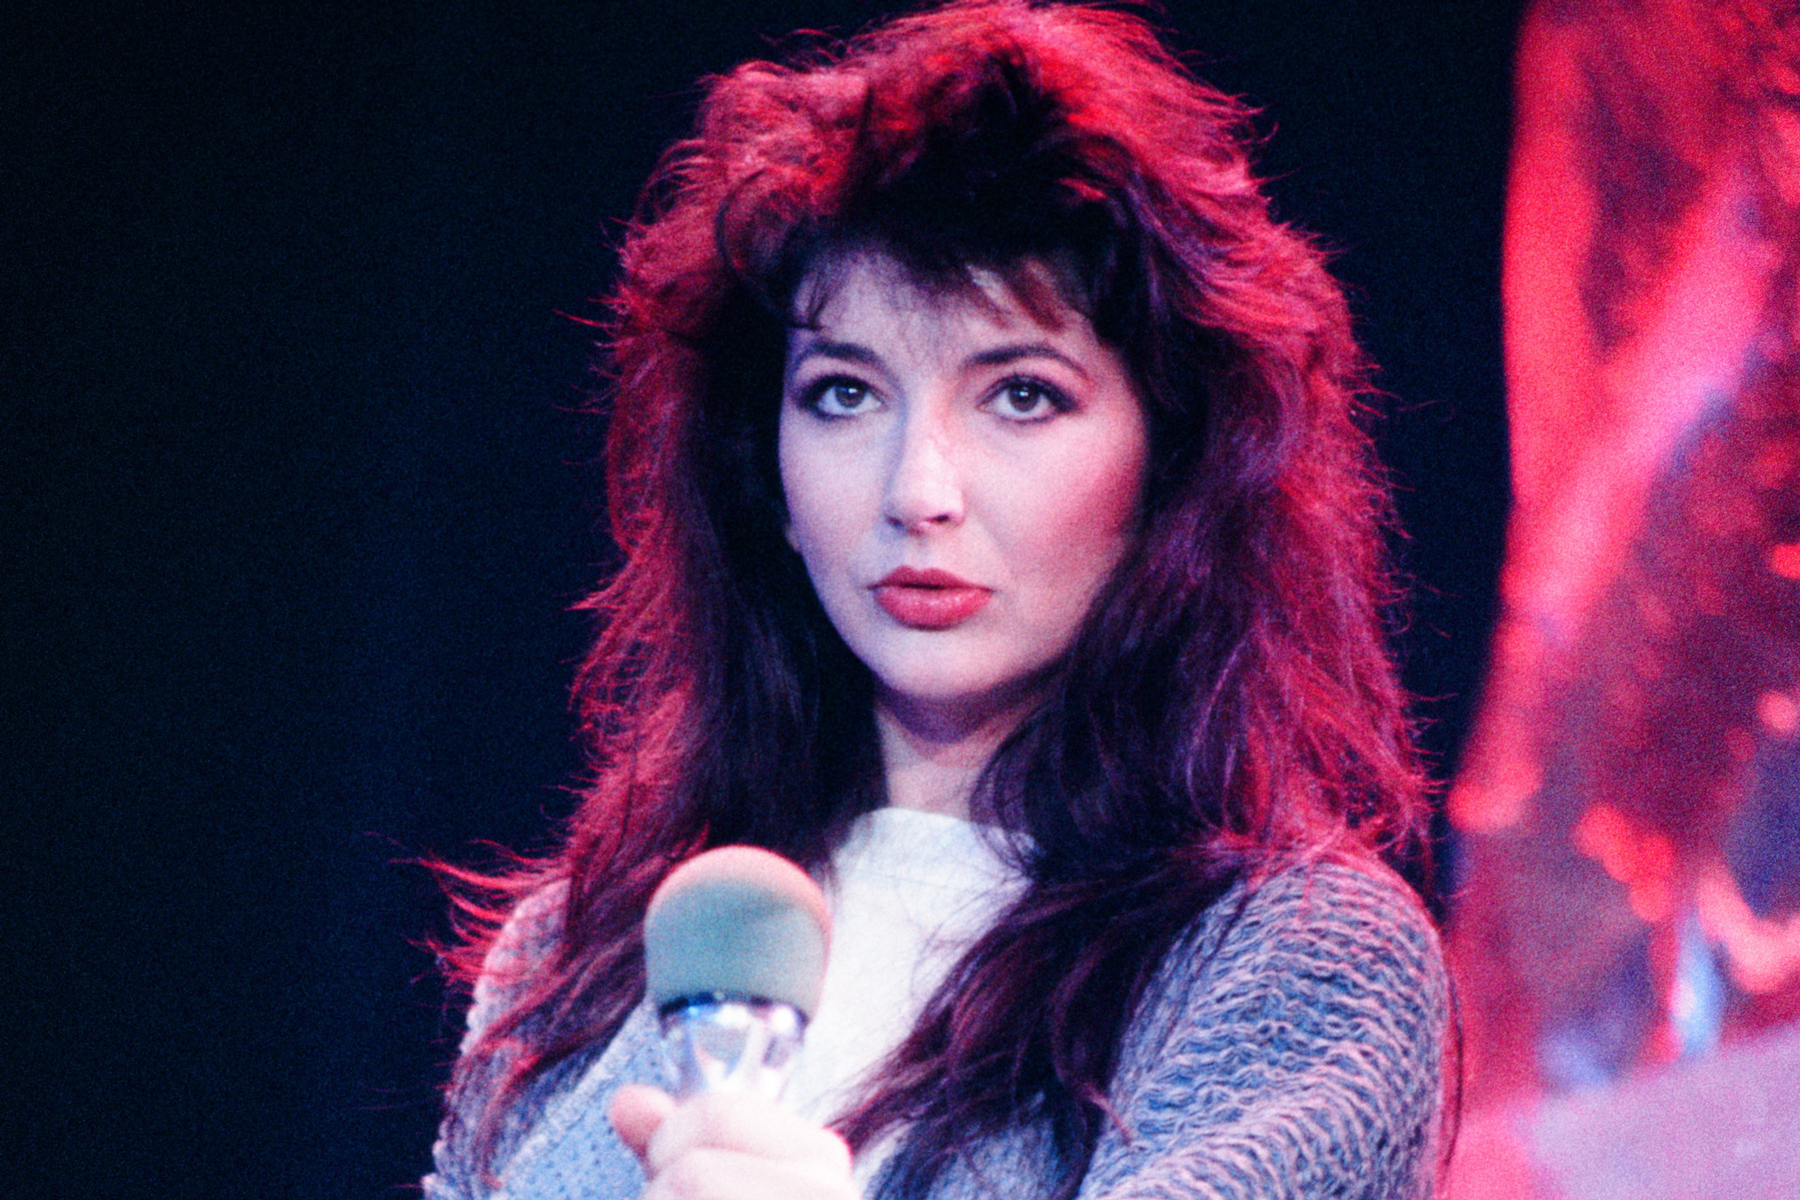 Why Kate Bush Still Sounds Ahead of Her Time With “Running Up That Hill”